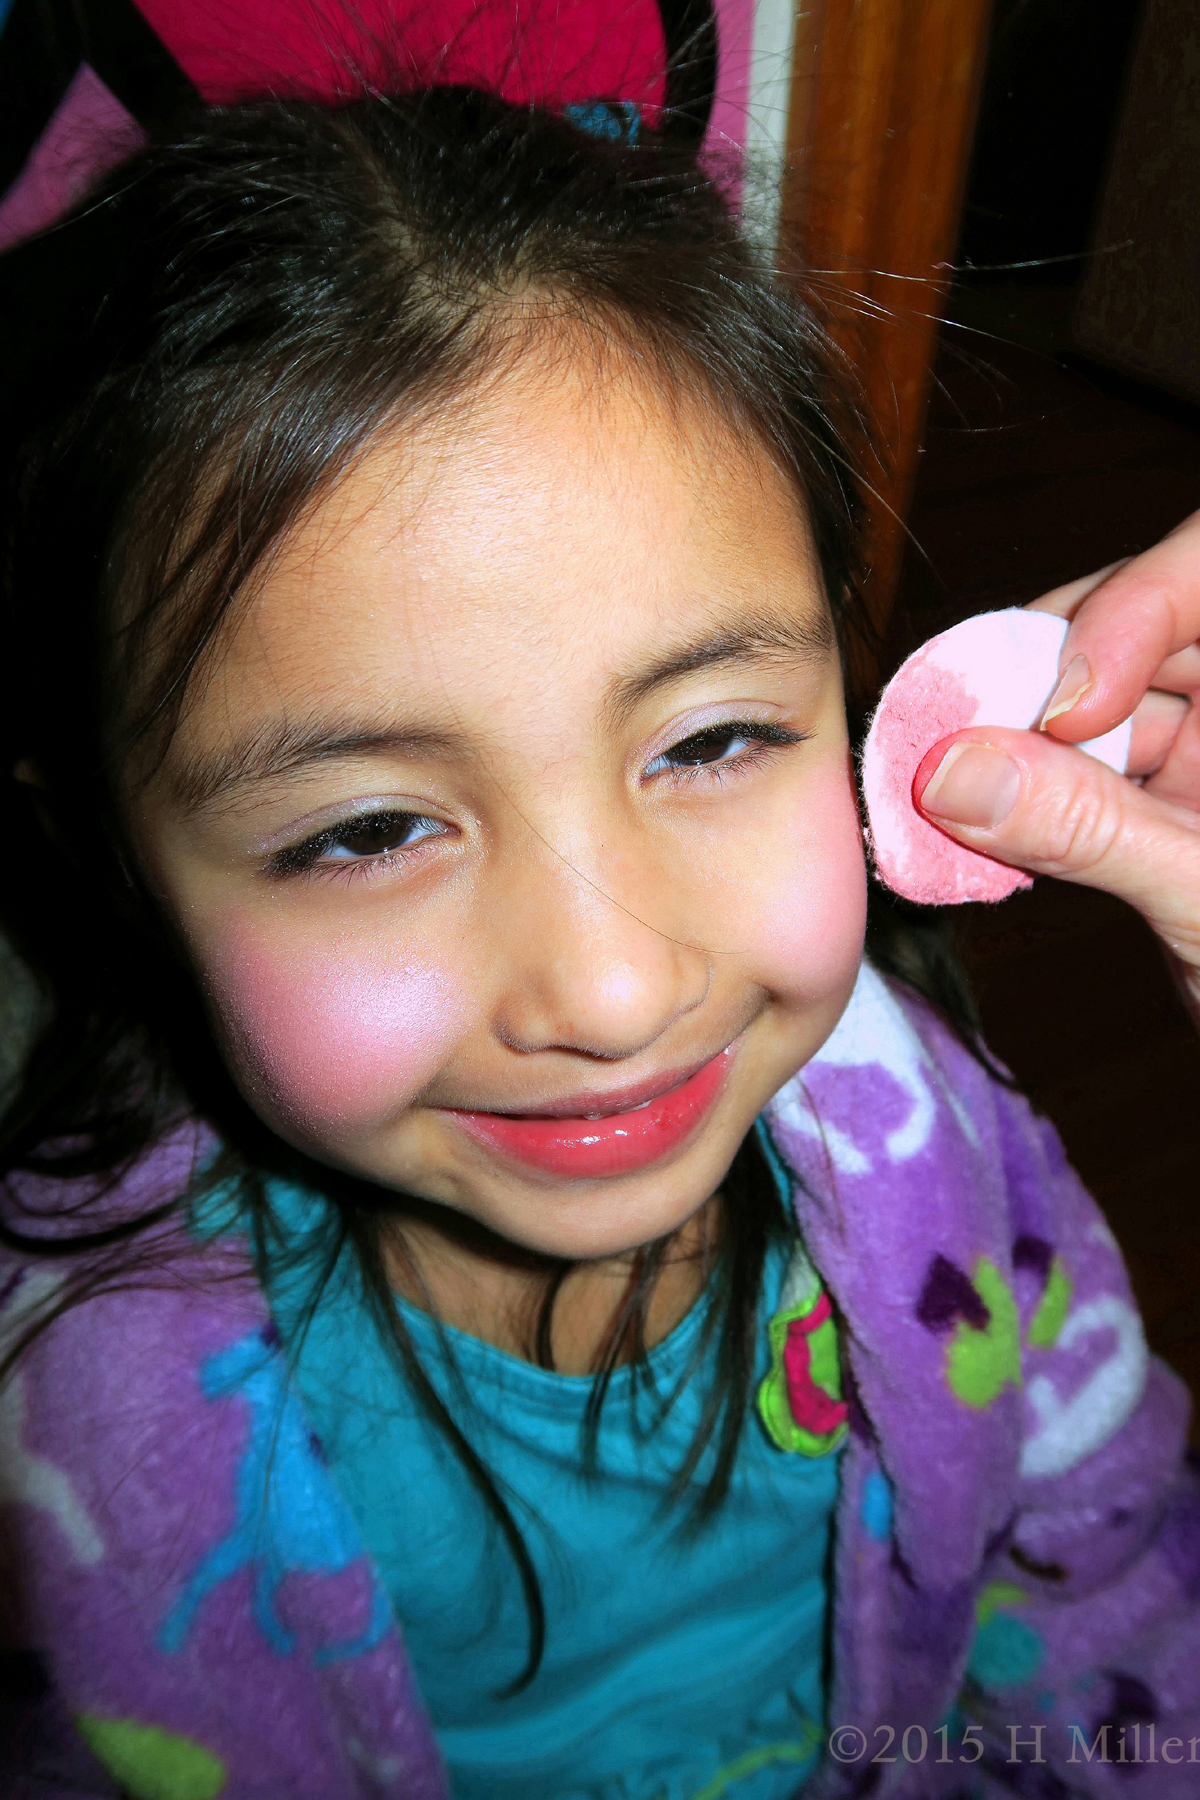 This Pink Blush Is A Very Pretty Accent Color For Kids Makeup! 